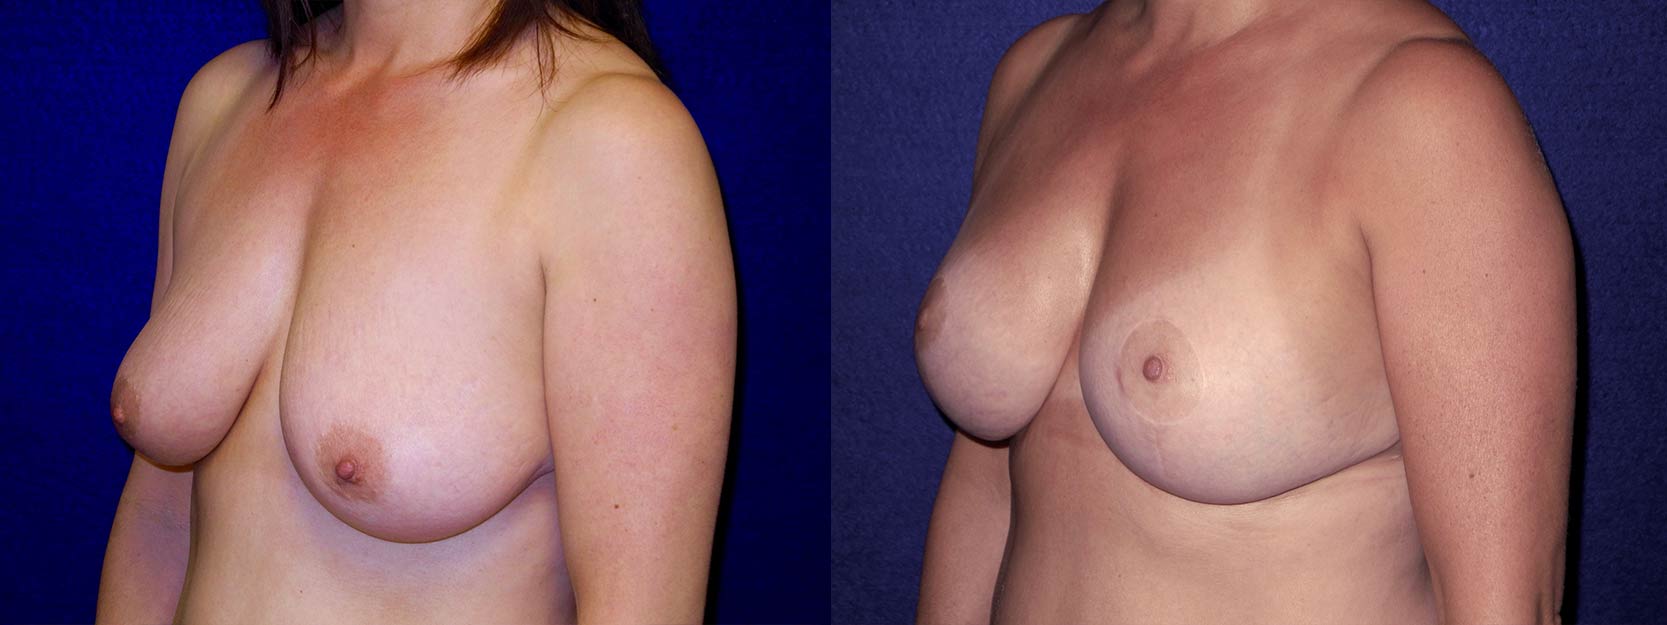 Left 3/4 view - Breast augmentation with Lift